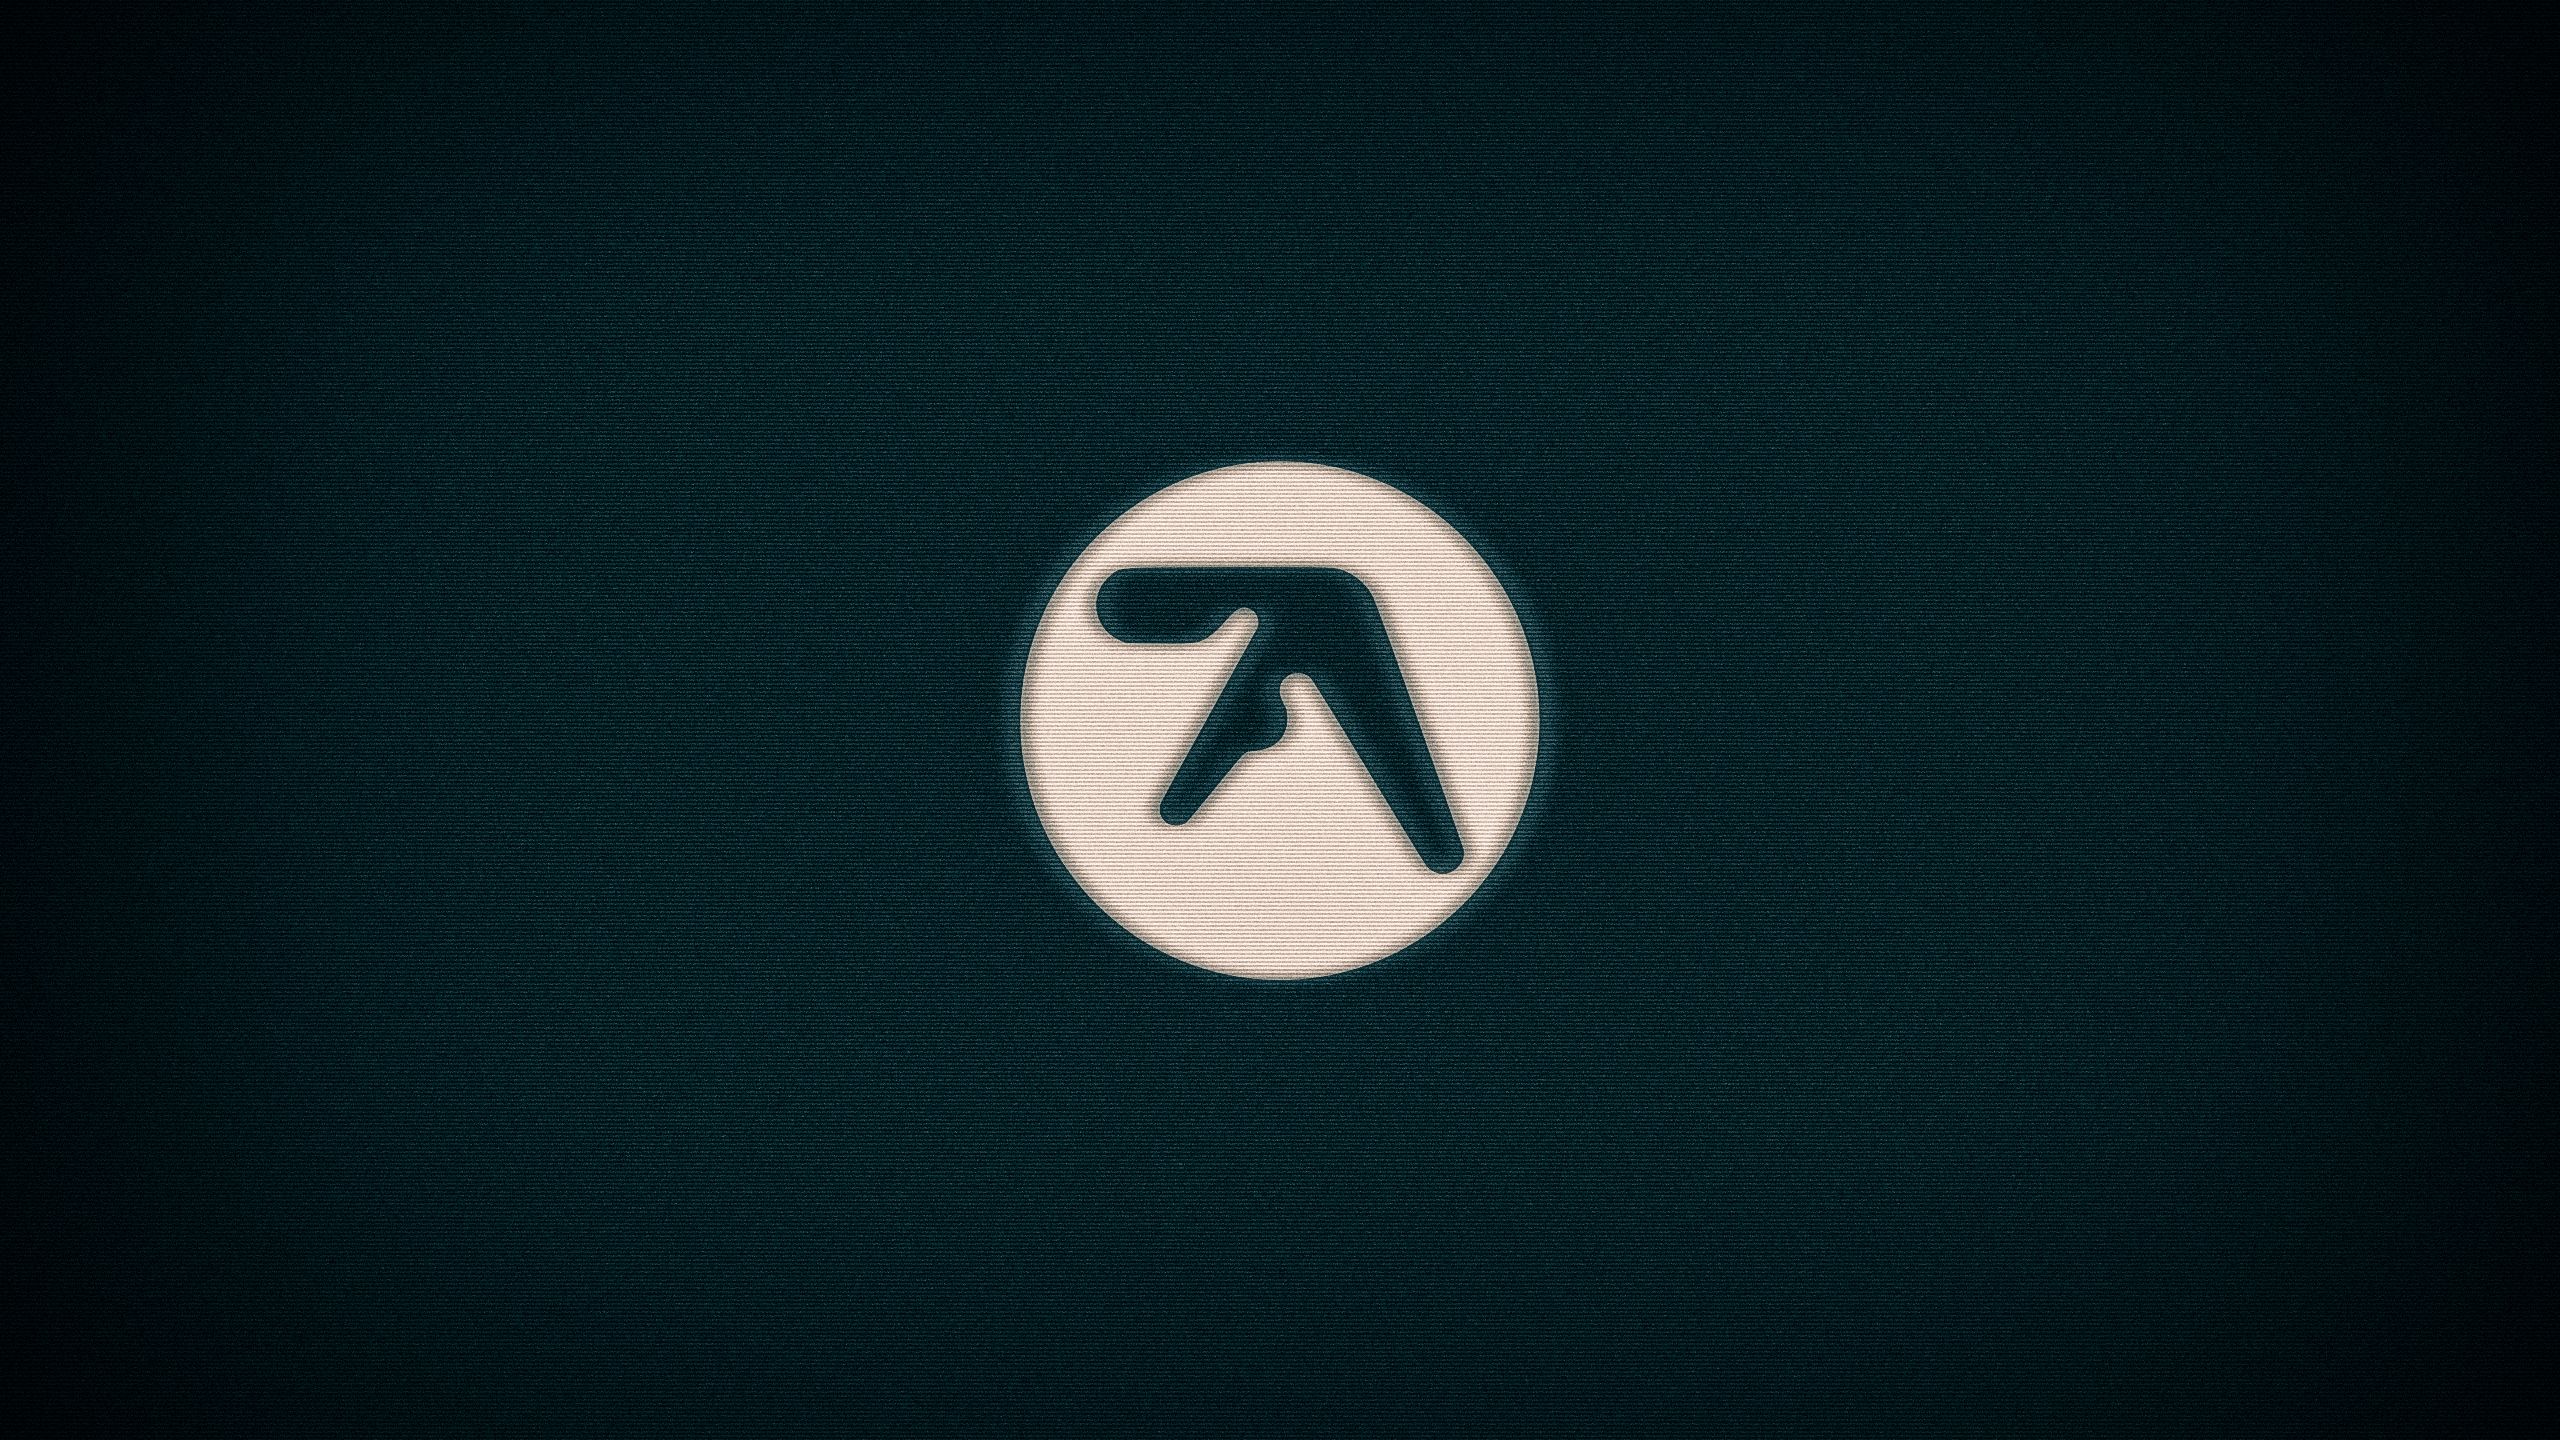 7 Aphex Twin HD Wallpapers | Backgrounds - Wallpaper Abyss